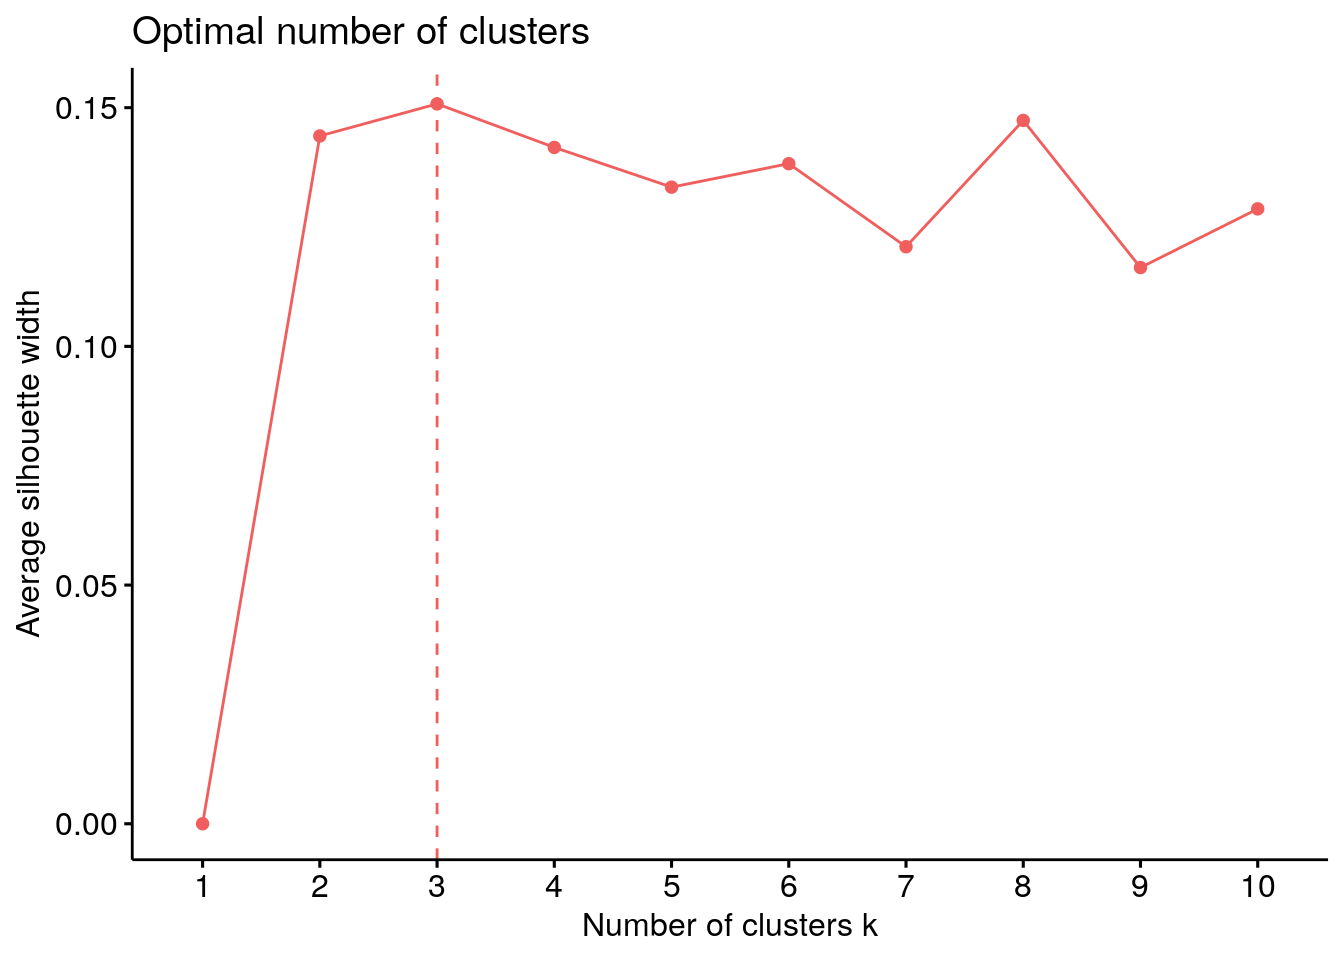 Optimal number of clusters when re-clustering the sprinters from step 1 using the silhouette appraoch.